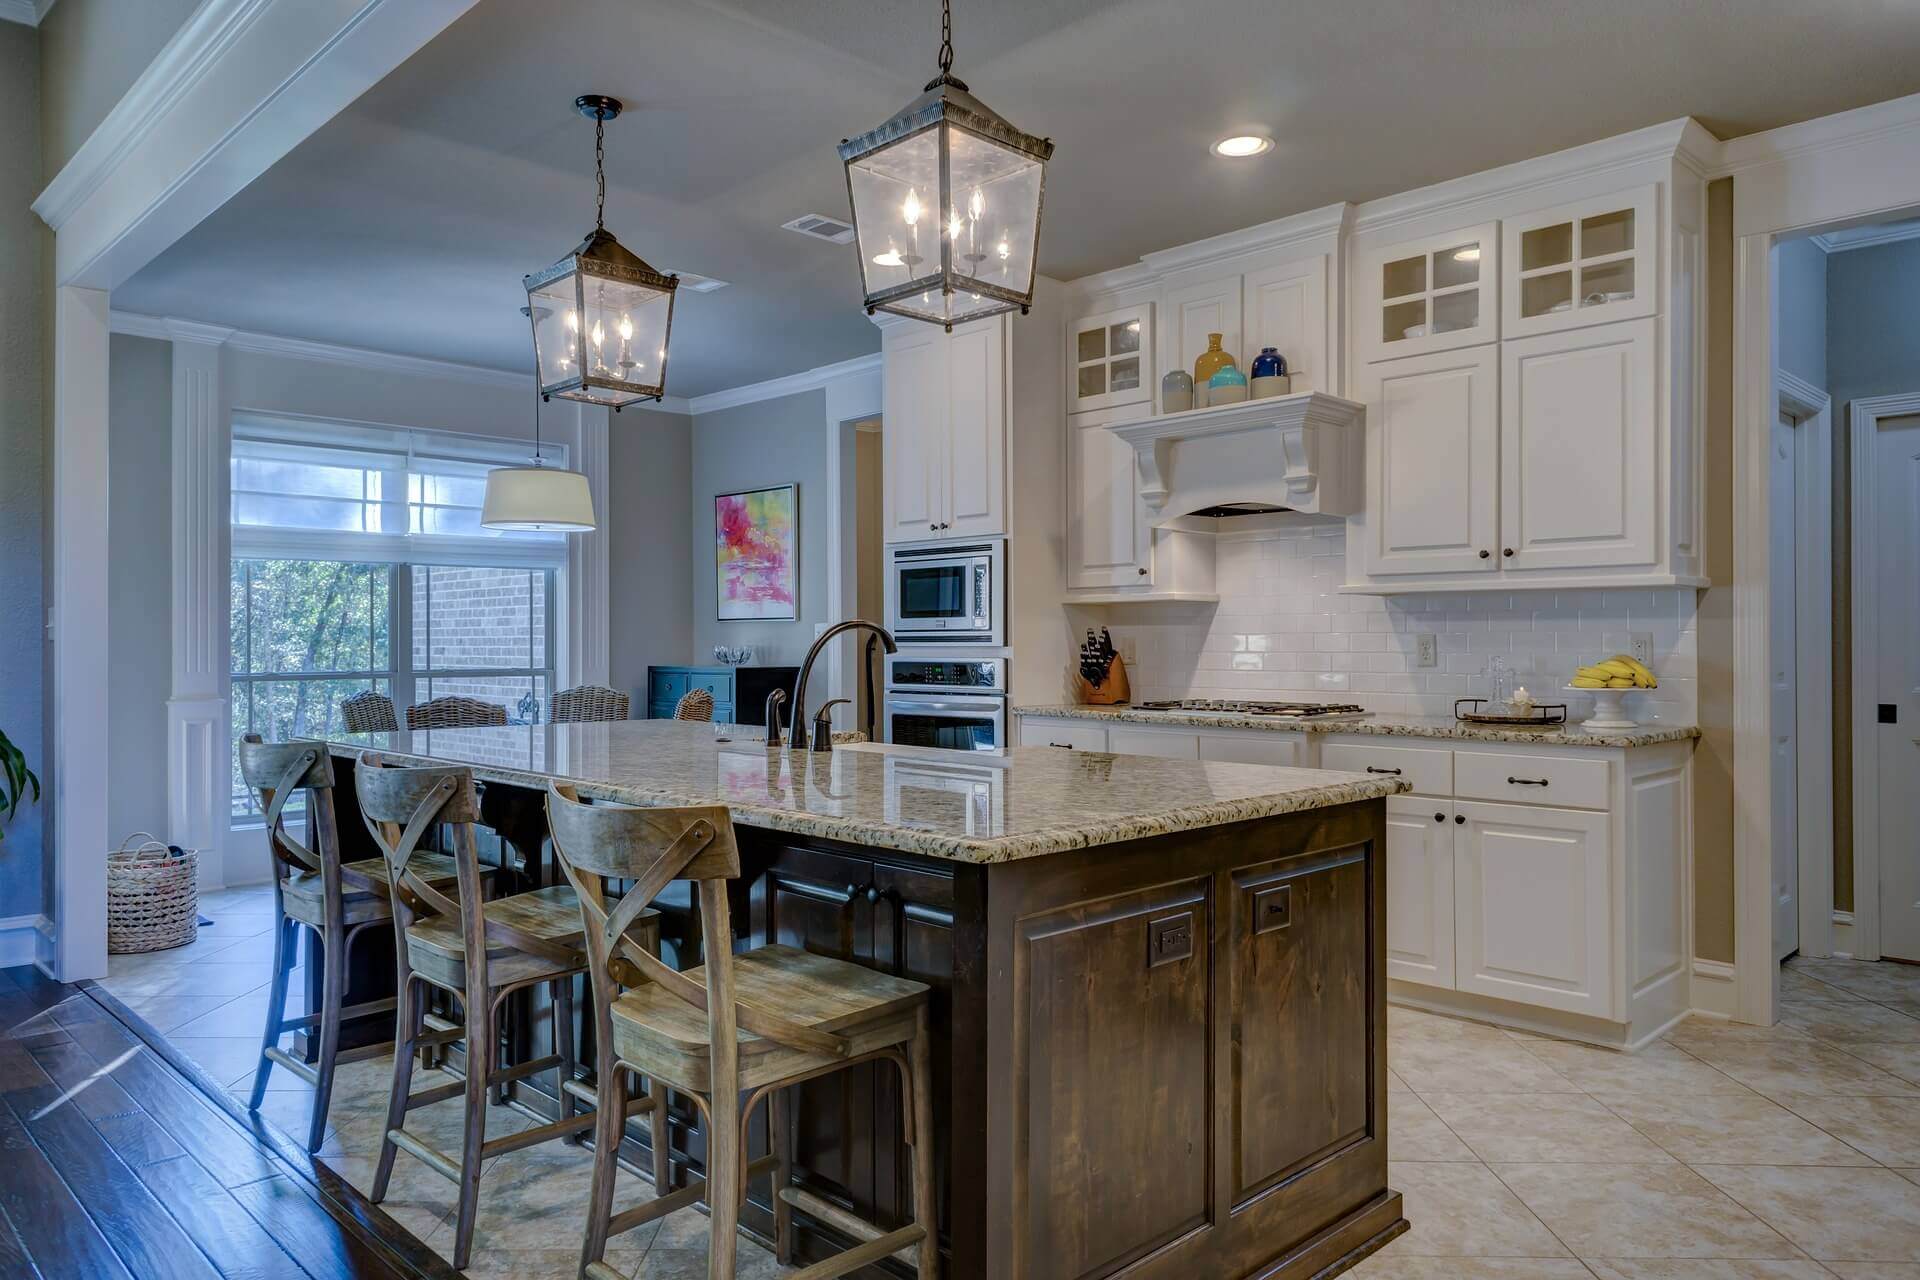 A southern styled kitchen with white cabinets, tan tiled floors, and an island bar in the middle